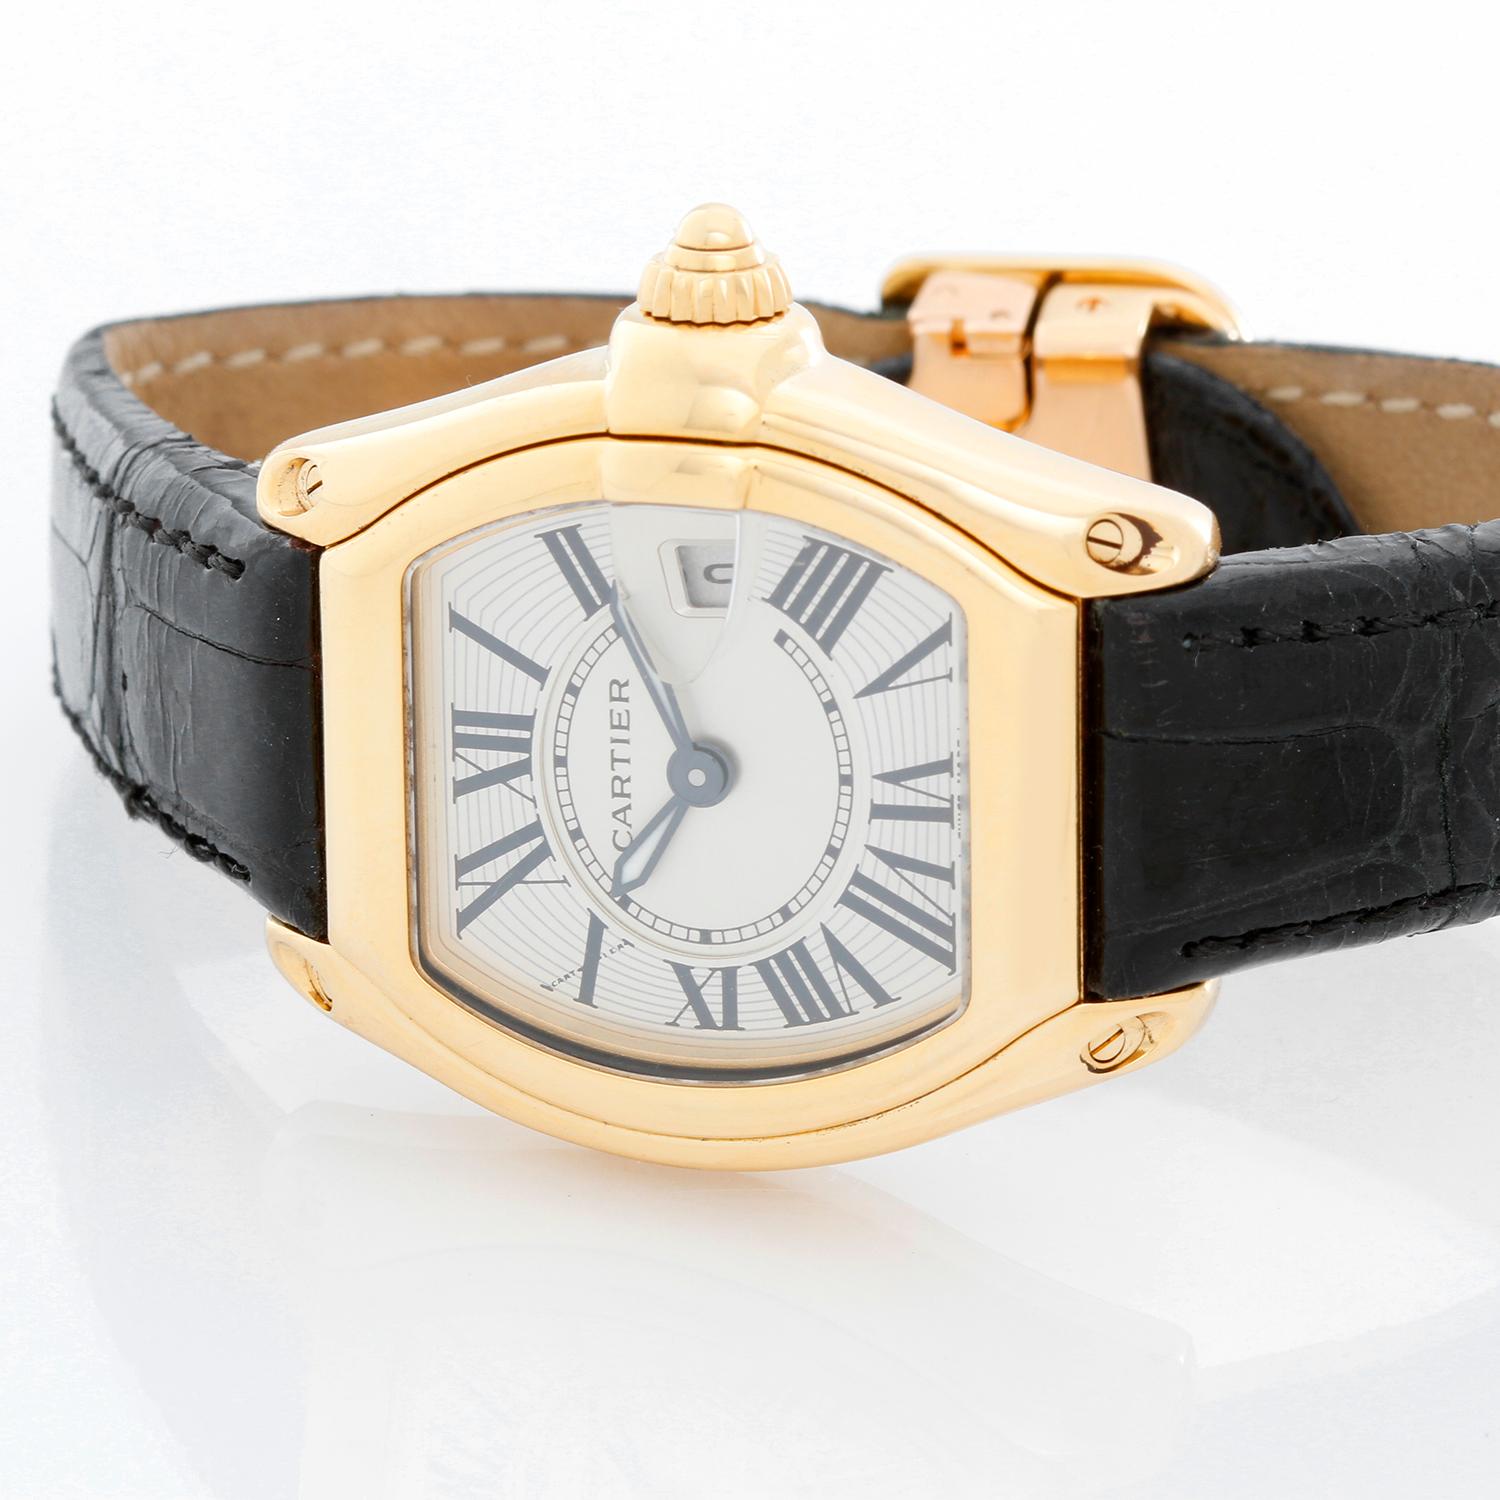 Cartier Roadster 18k Yellow Gold Ladies 31mm Quartz Watch W62018Y5 - Quartz. 18k yellow gold case (31mm x 36mm). Silver guilloche dial with black Roman numerals; date at 3 o'clock.  Strap band with 18k yellow gold Cartier deployant clasp. Pre-owned